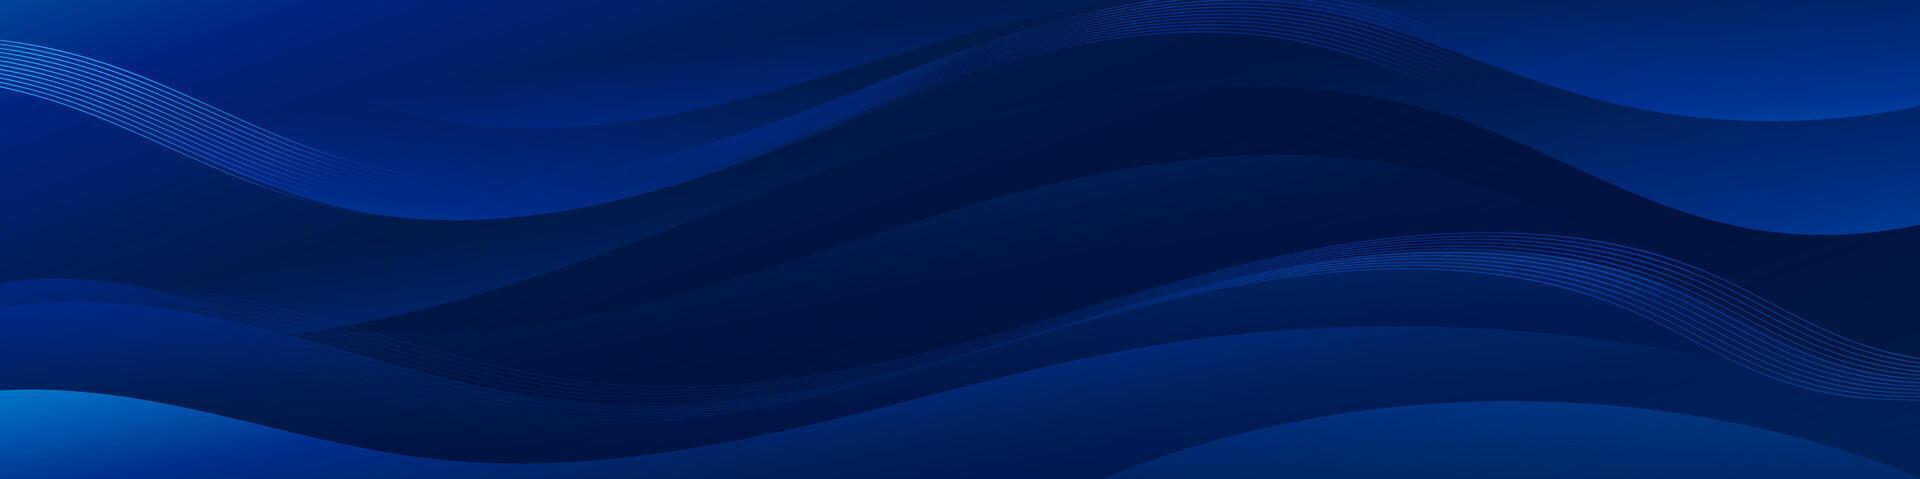 Abstract Dark blue banner color with a unique wavy design. It is ideal for creating eye catching headers, promotional banners, and graphic elements with a modern and dynamic look. vector